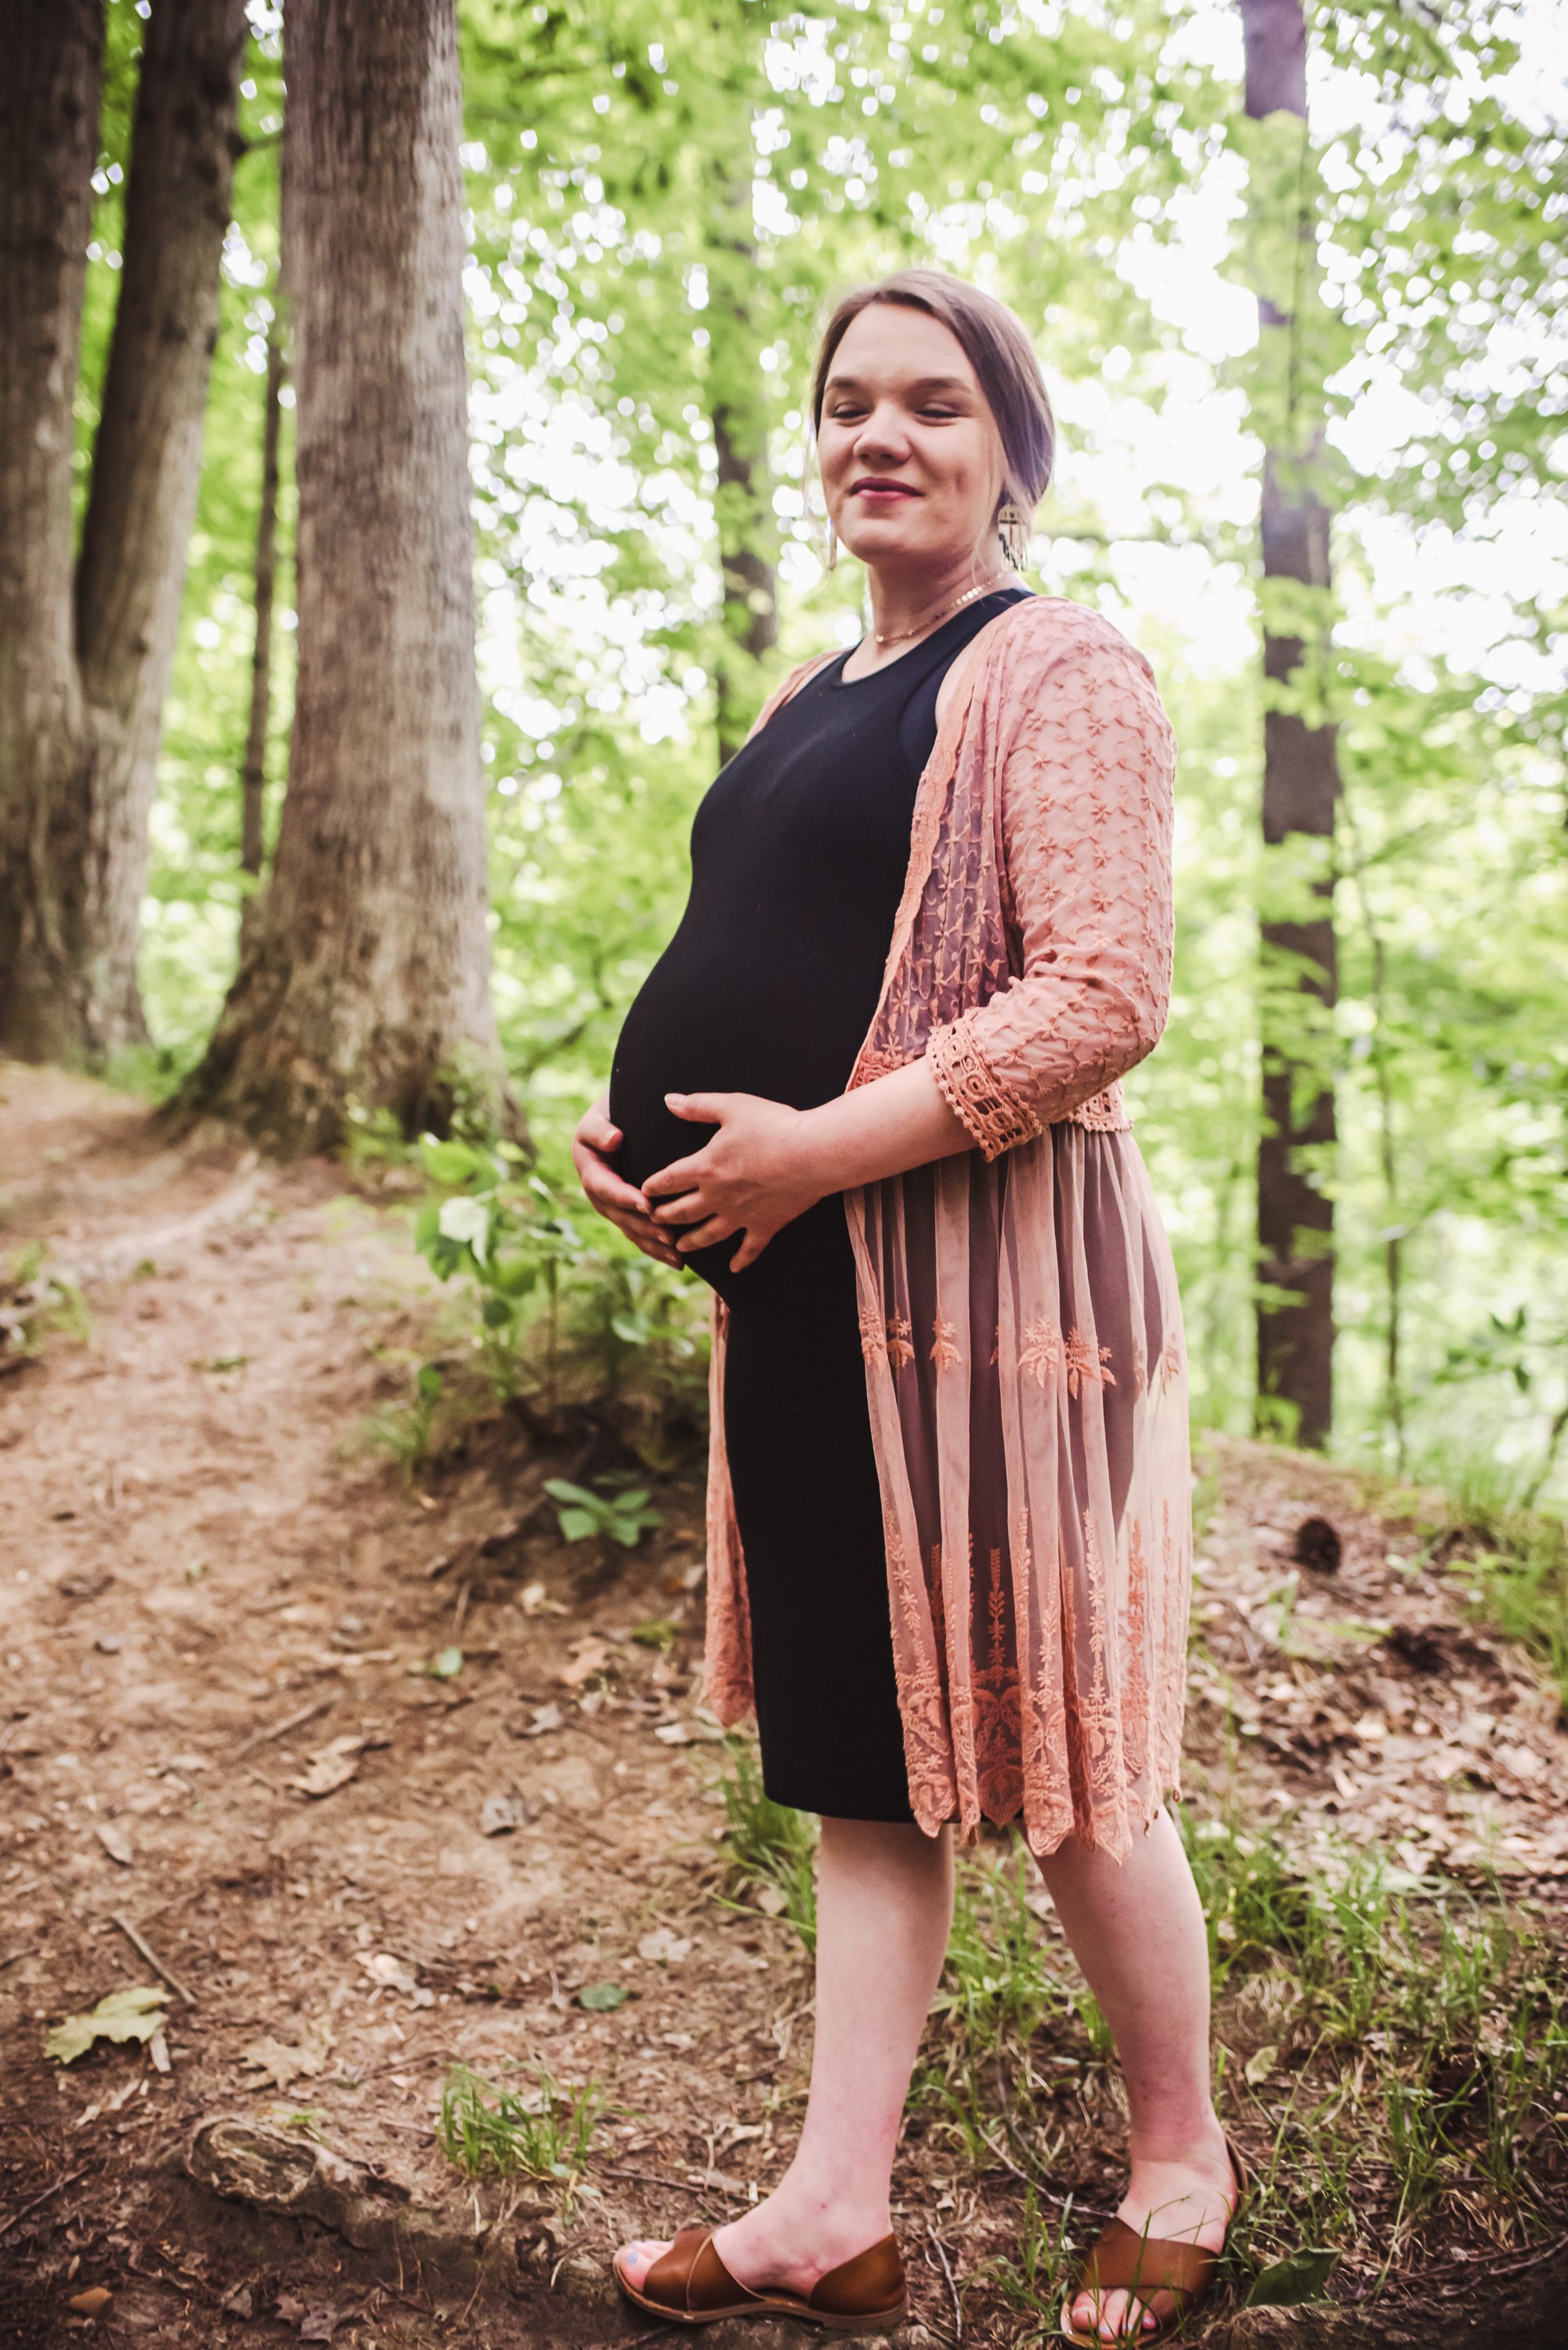 Baby Walker Maternity Session 2022 Randi Armstrong Photography-5.jpg